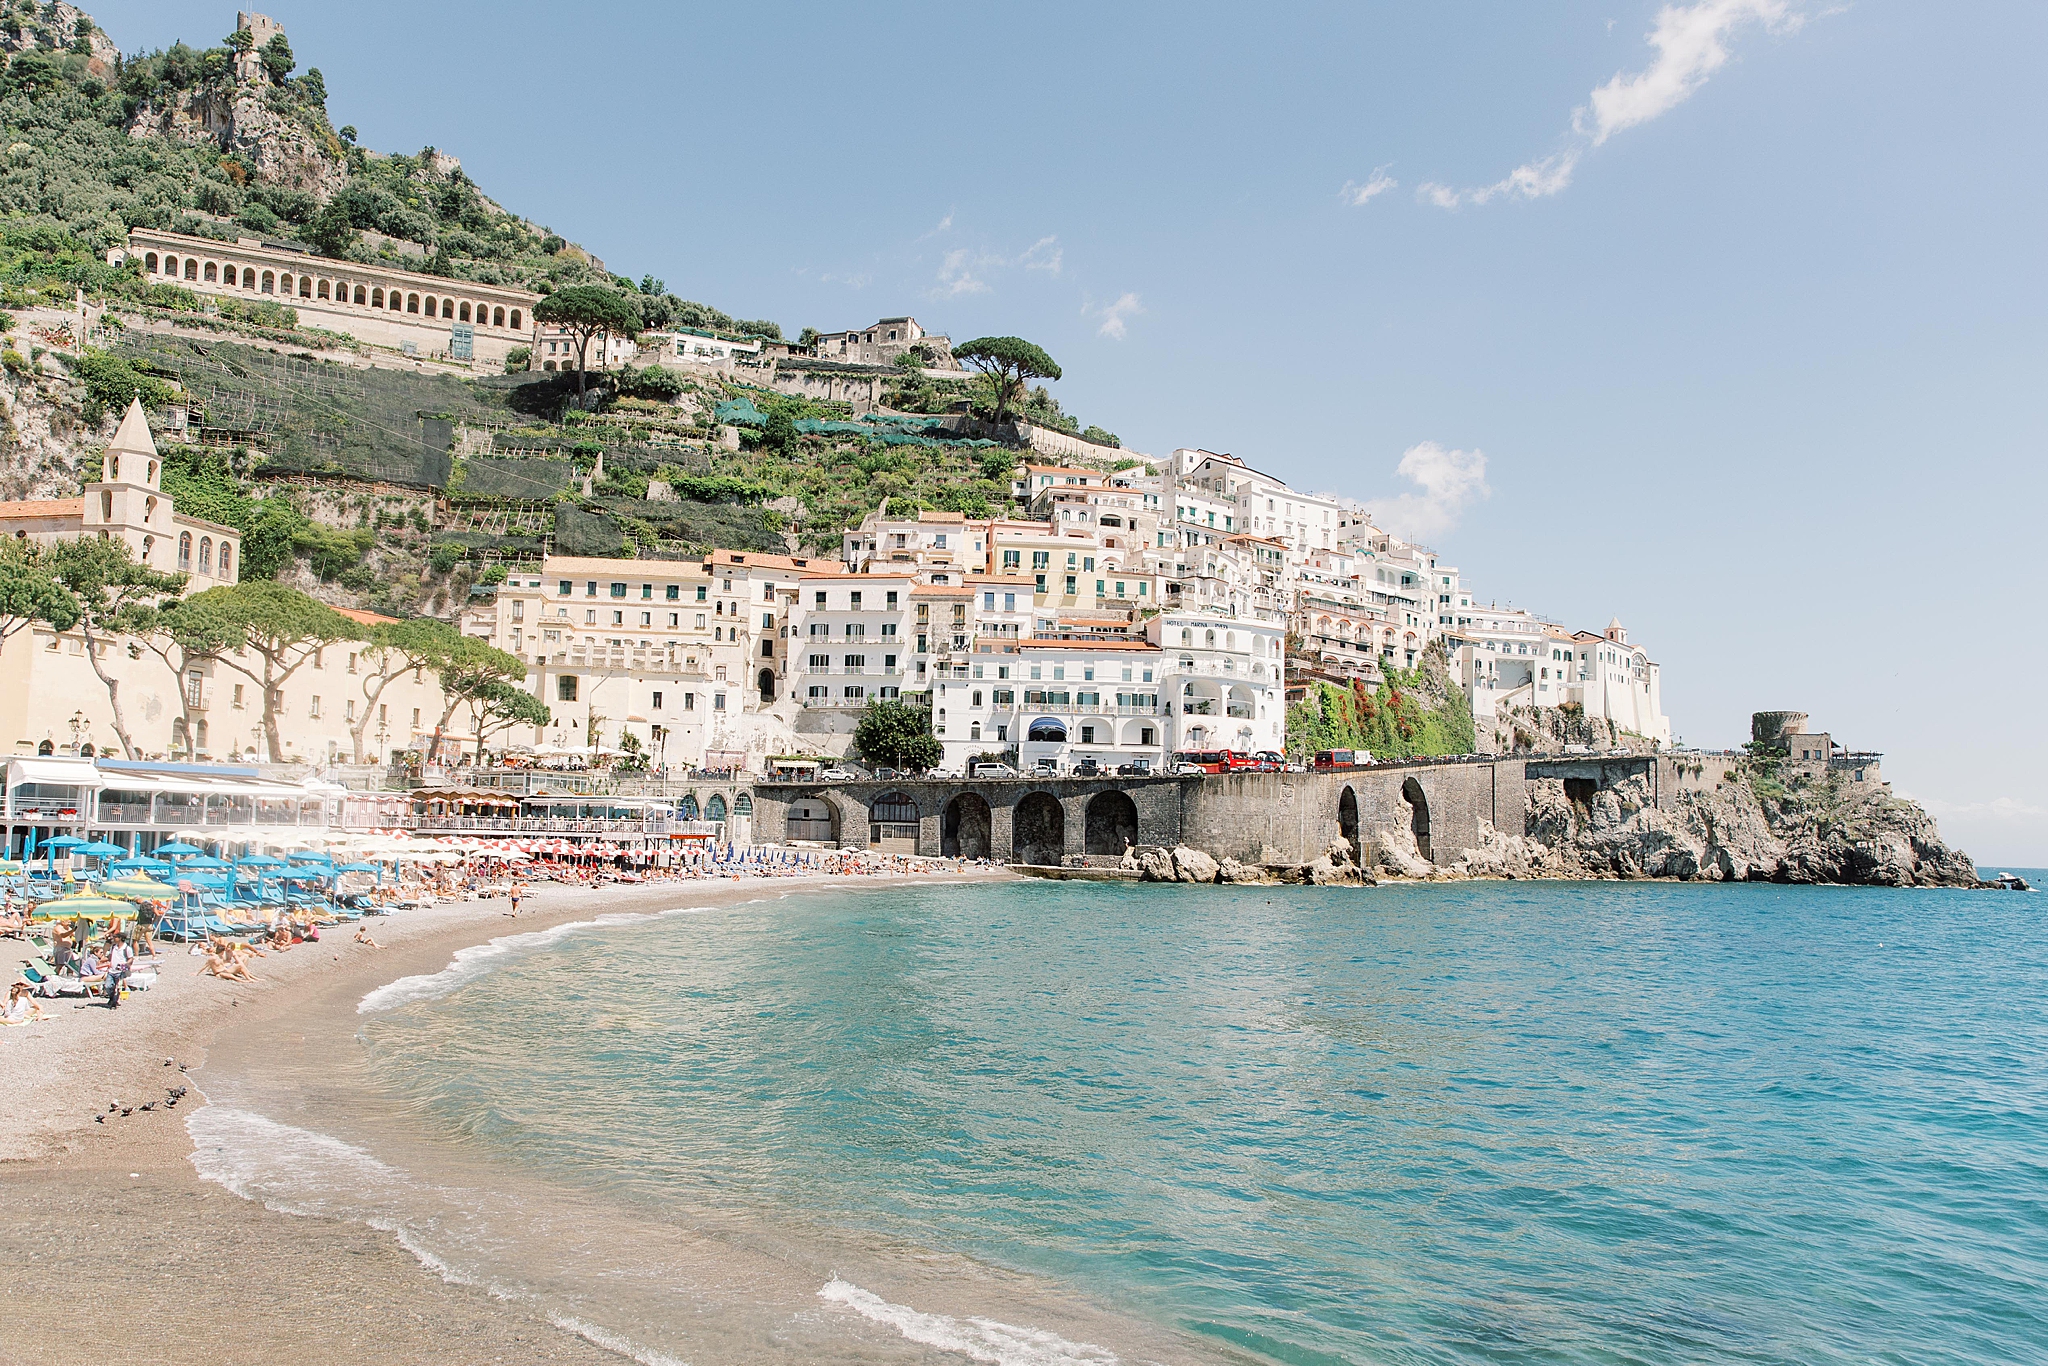 Destination wedding photographer, Alicia Lacey, travels to Amalfi Coast to photography highlights on film, including Positano and Villa Cimbrone in Ravello.